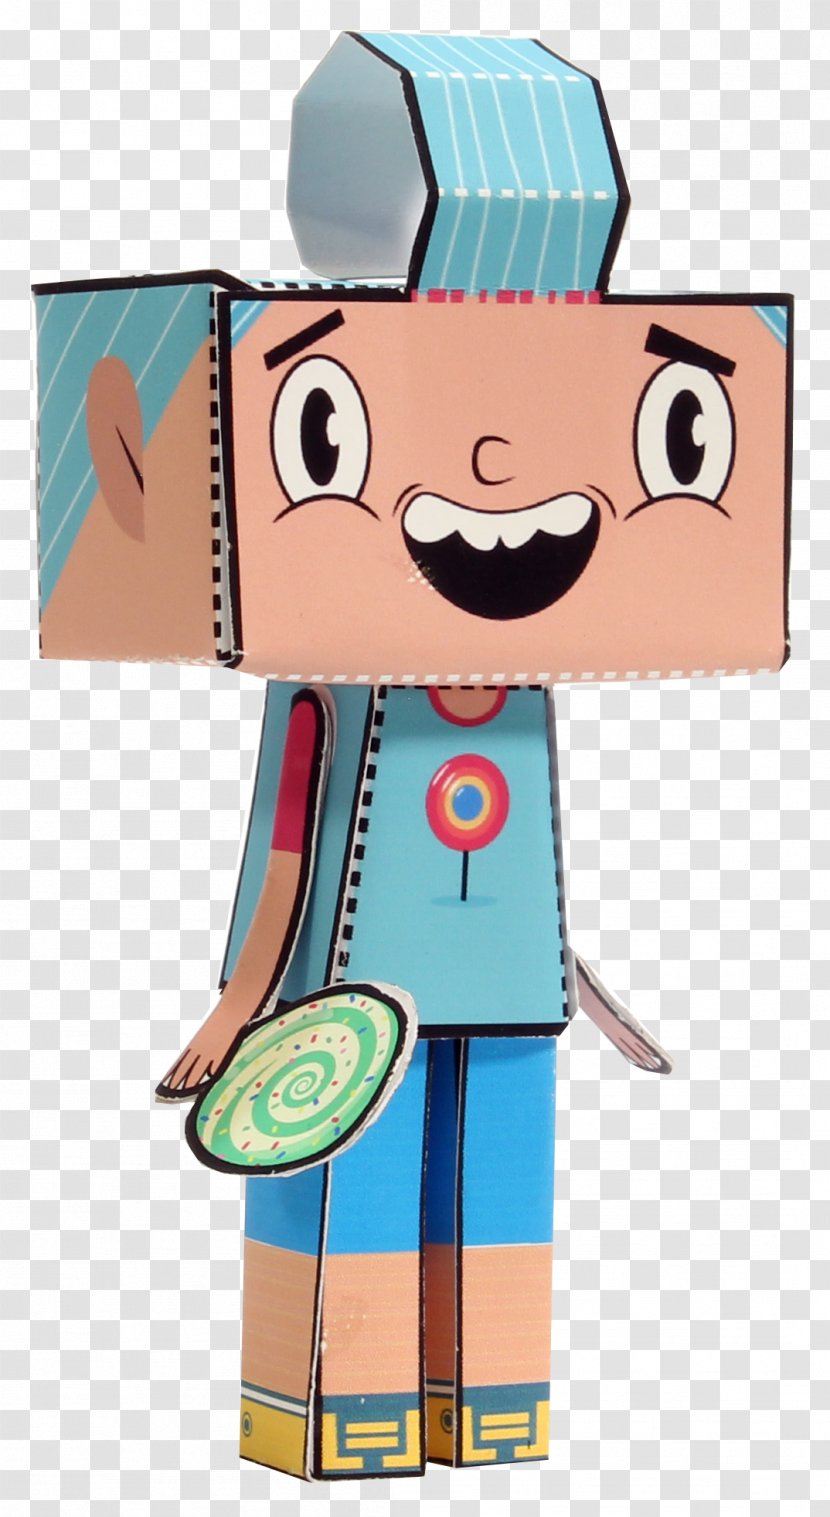 Toy - Animated Cartoon - Paper Transparent PNG